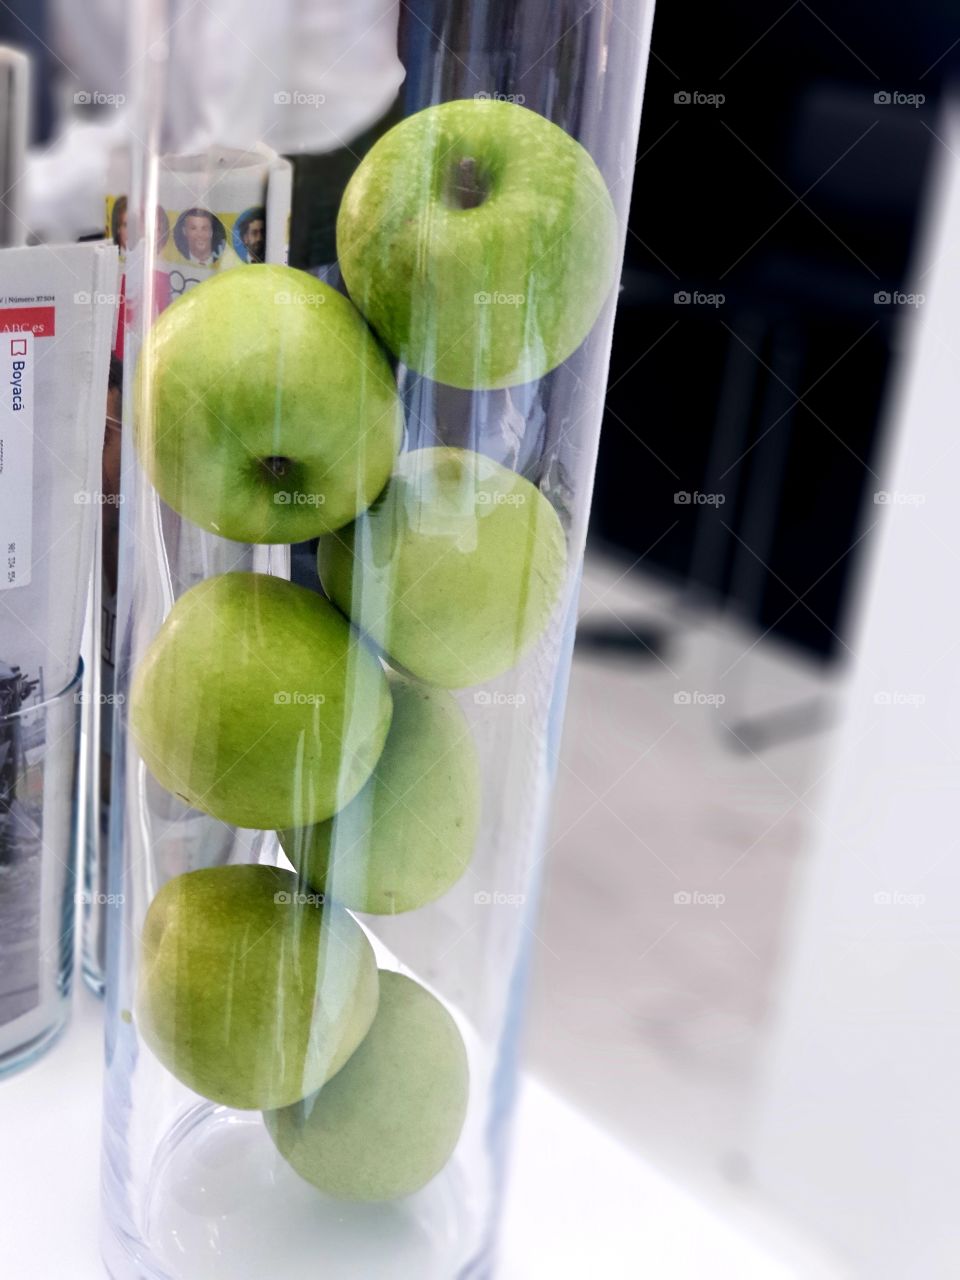 Apples in a glass tube